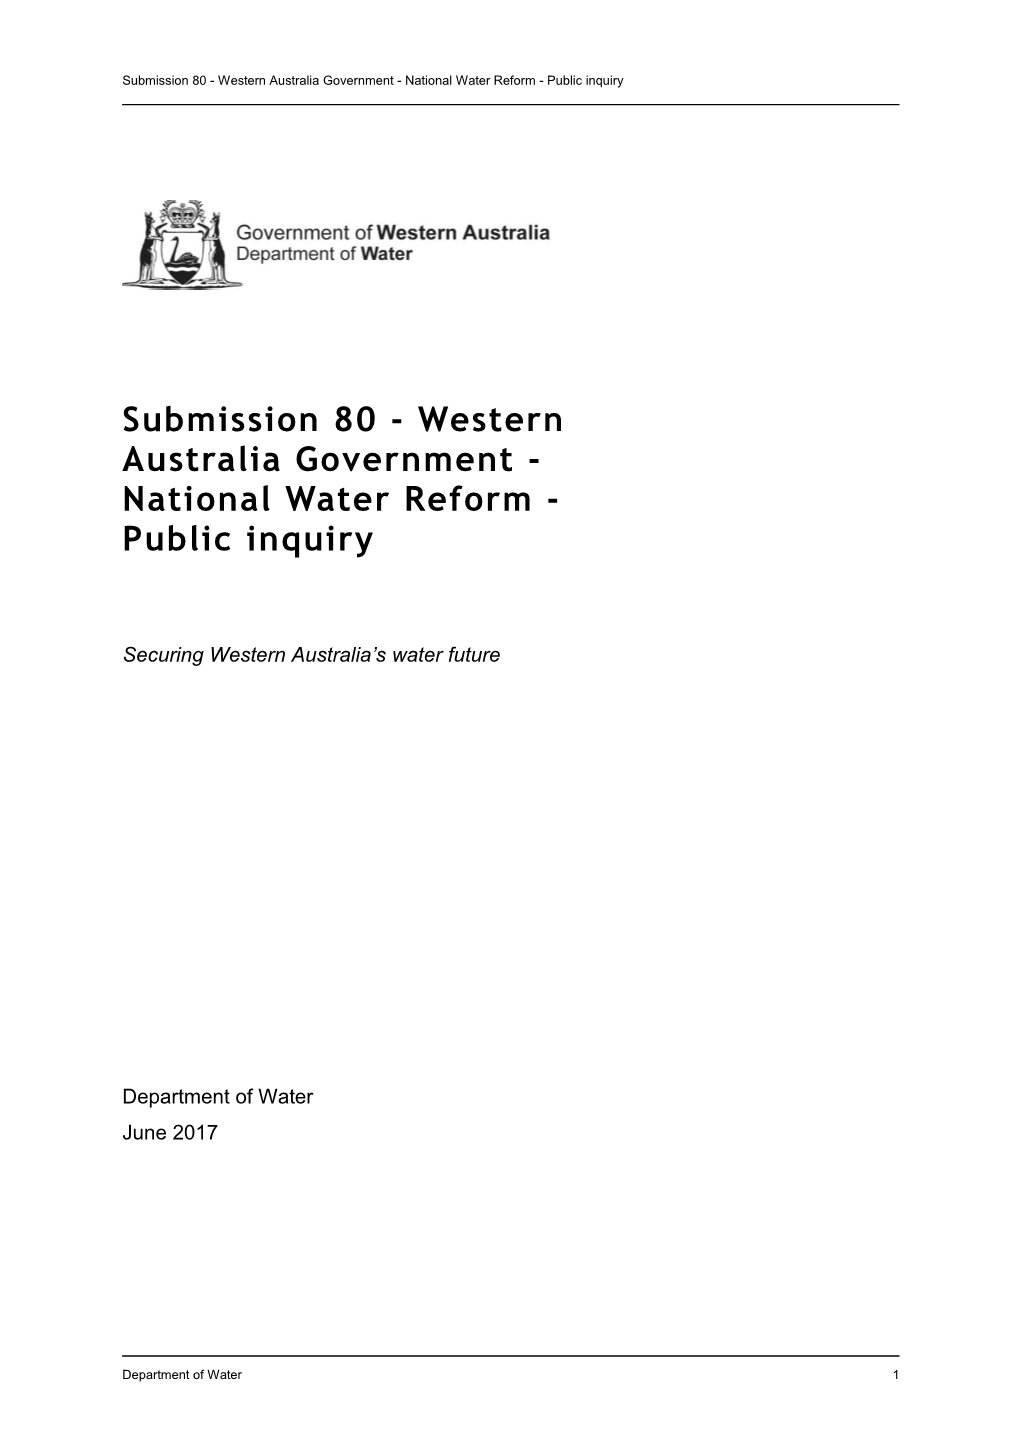 Submission 80 - Western Australia Government - National Water Reform - Public Inquiry